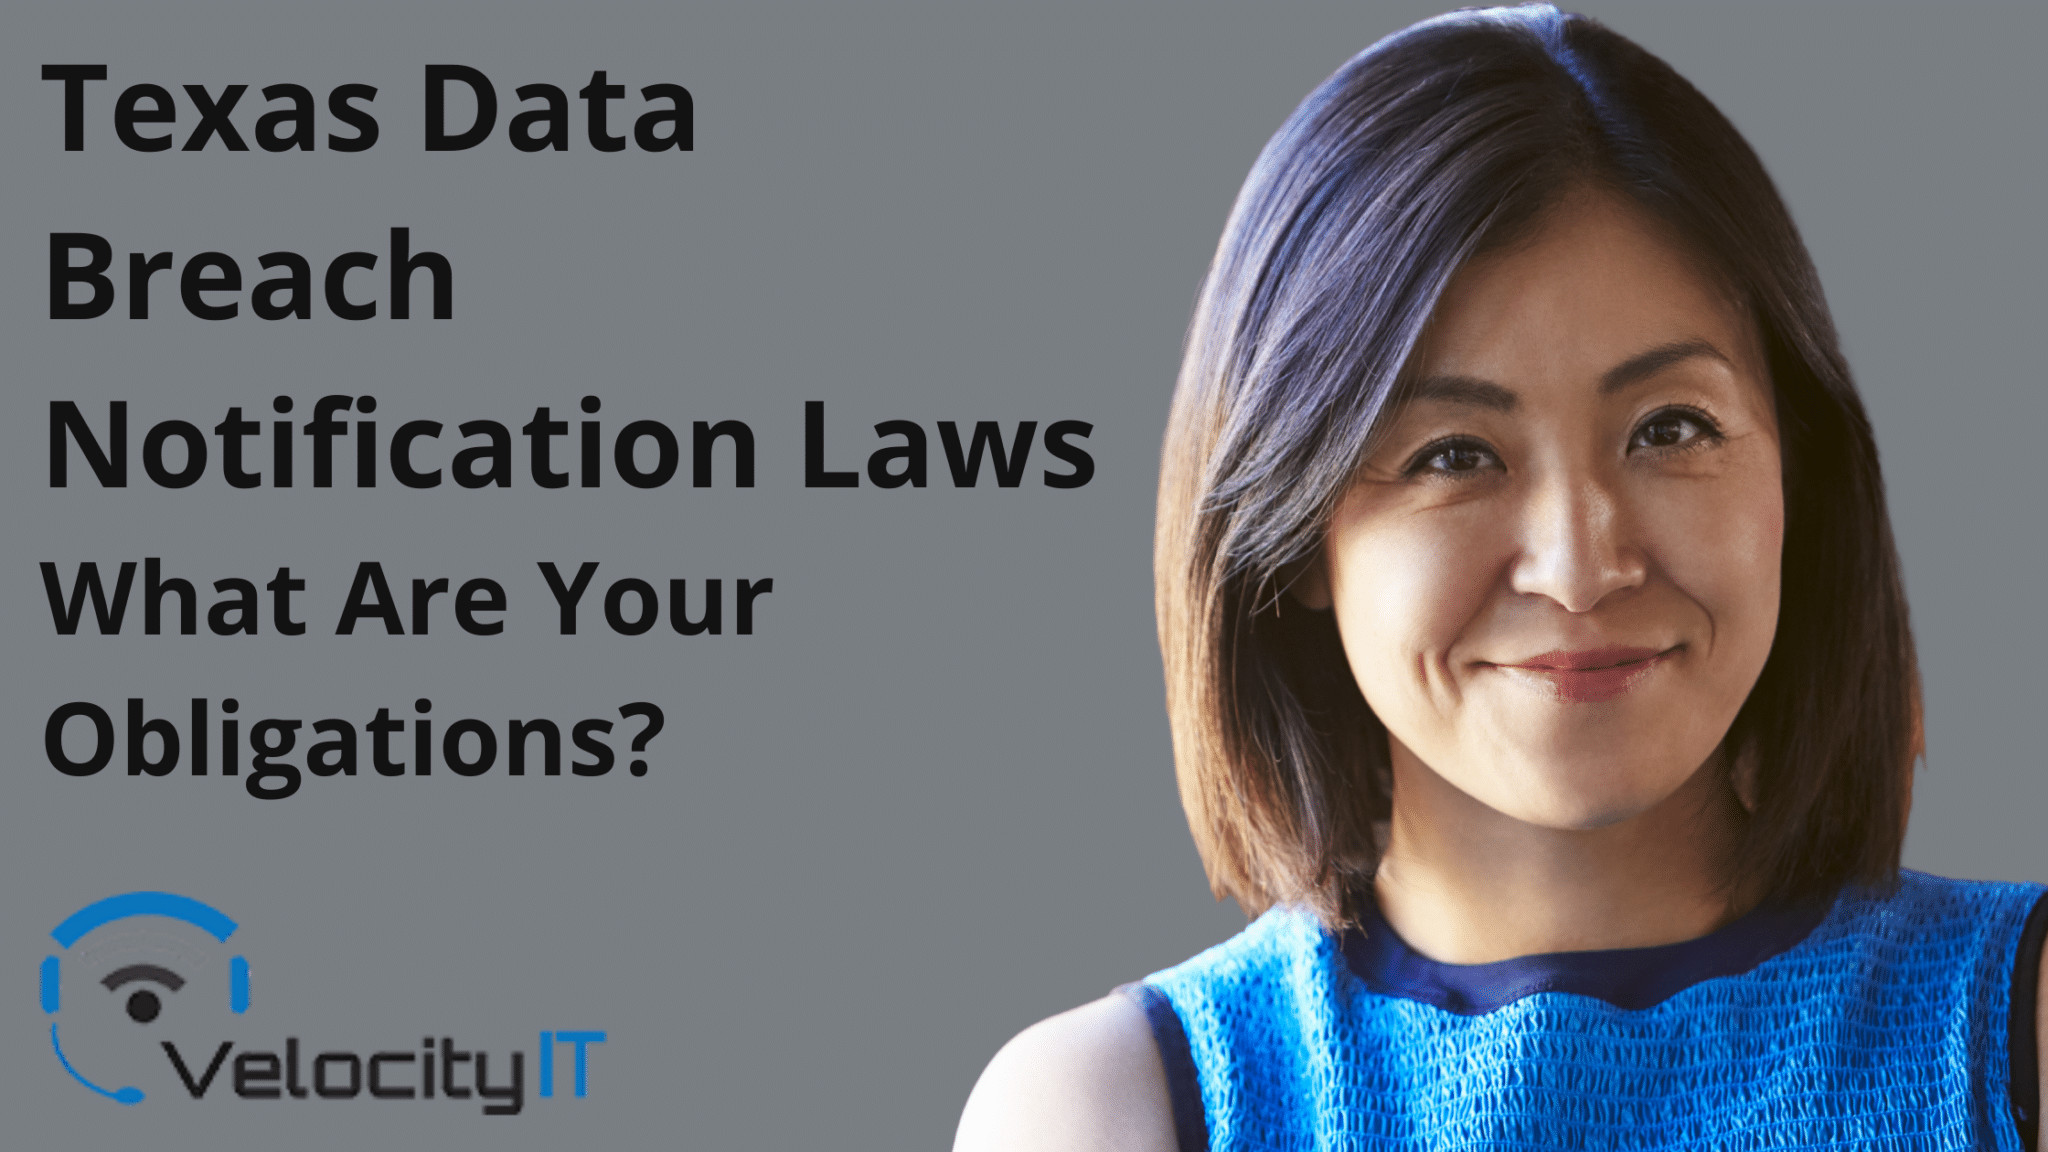 Texas Data Breach Notification Laws: What Are Your Obligations?